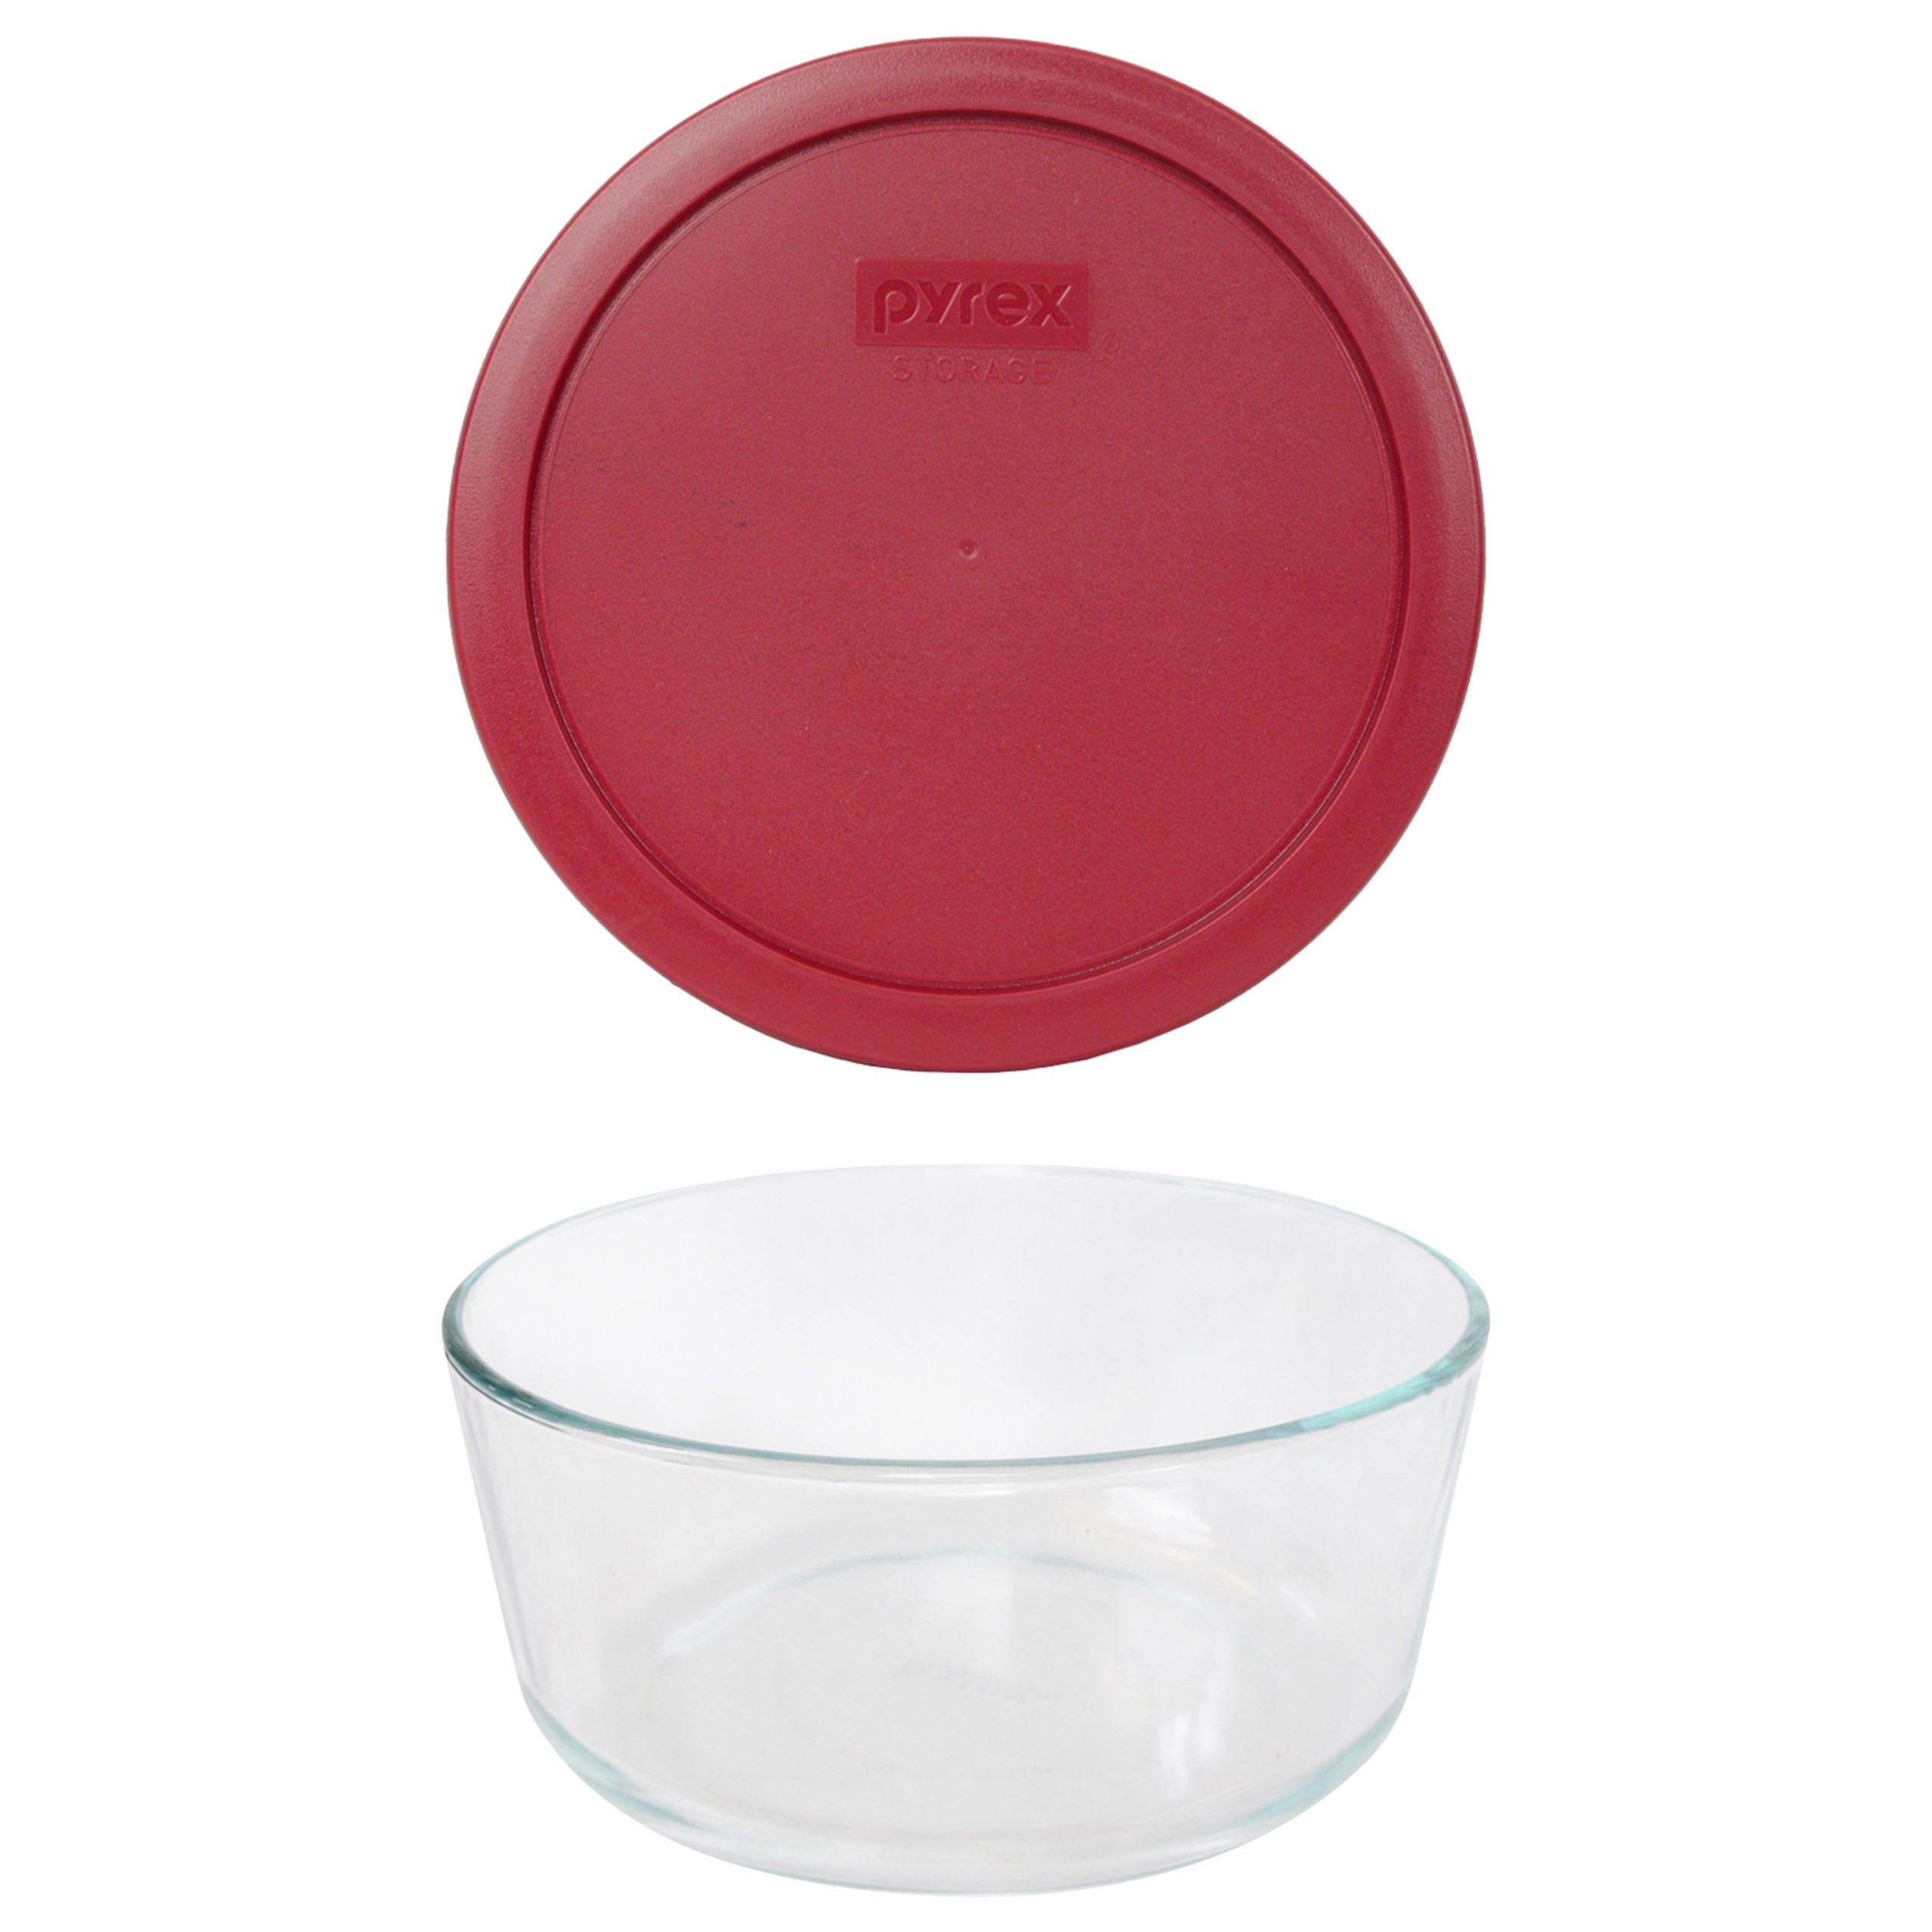 Pyrex (1) 7402 6-Cup Sculpted Glass Mixing Bowl and (1) 7402-PC Blue Spruce  Plastic Lid